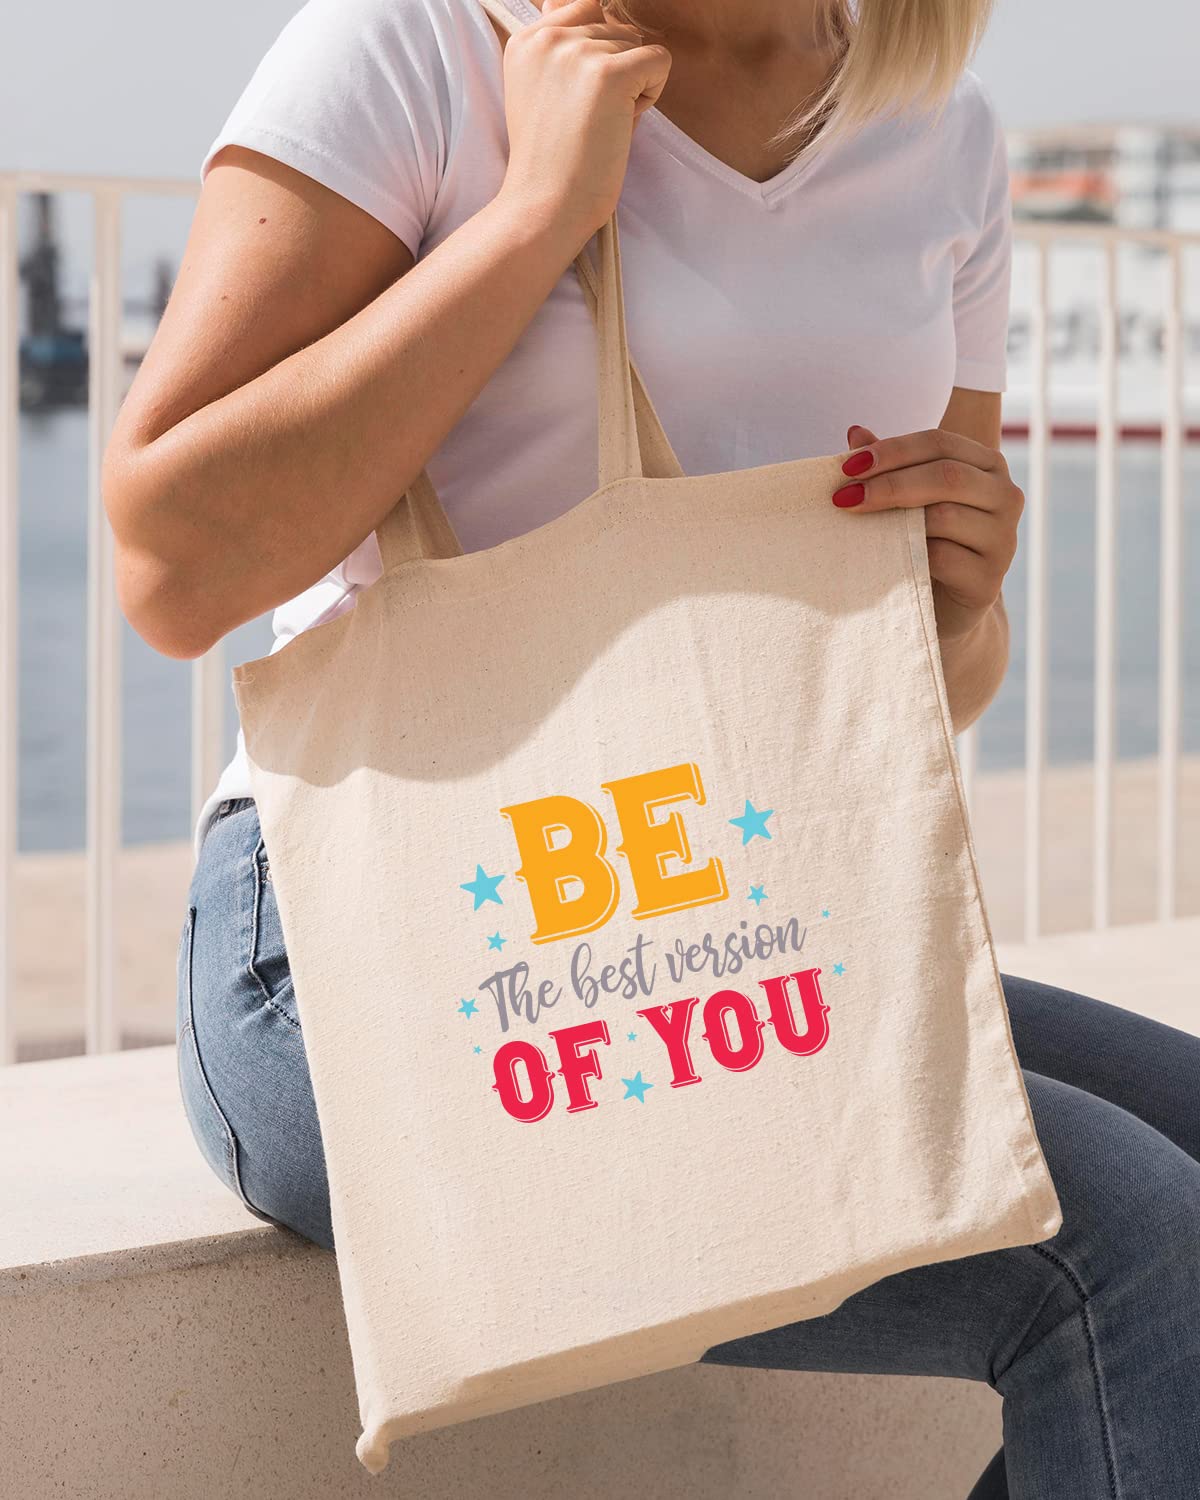 The Pink Magnet Be The Best Version Of You Tote Bag - Canvas Tote Bag for Women | Printed Multipurpose Cotton Bags | Cute Hand Bag for Girls | Best for College, Travel, Grocery | Reusable Shopping Bag | Eco-Friendly Tote Bag